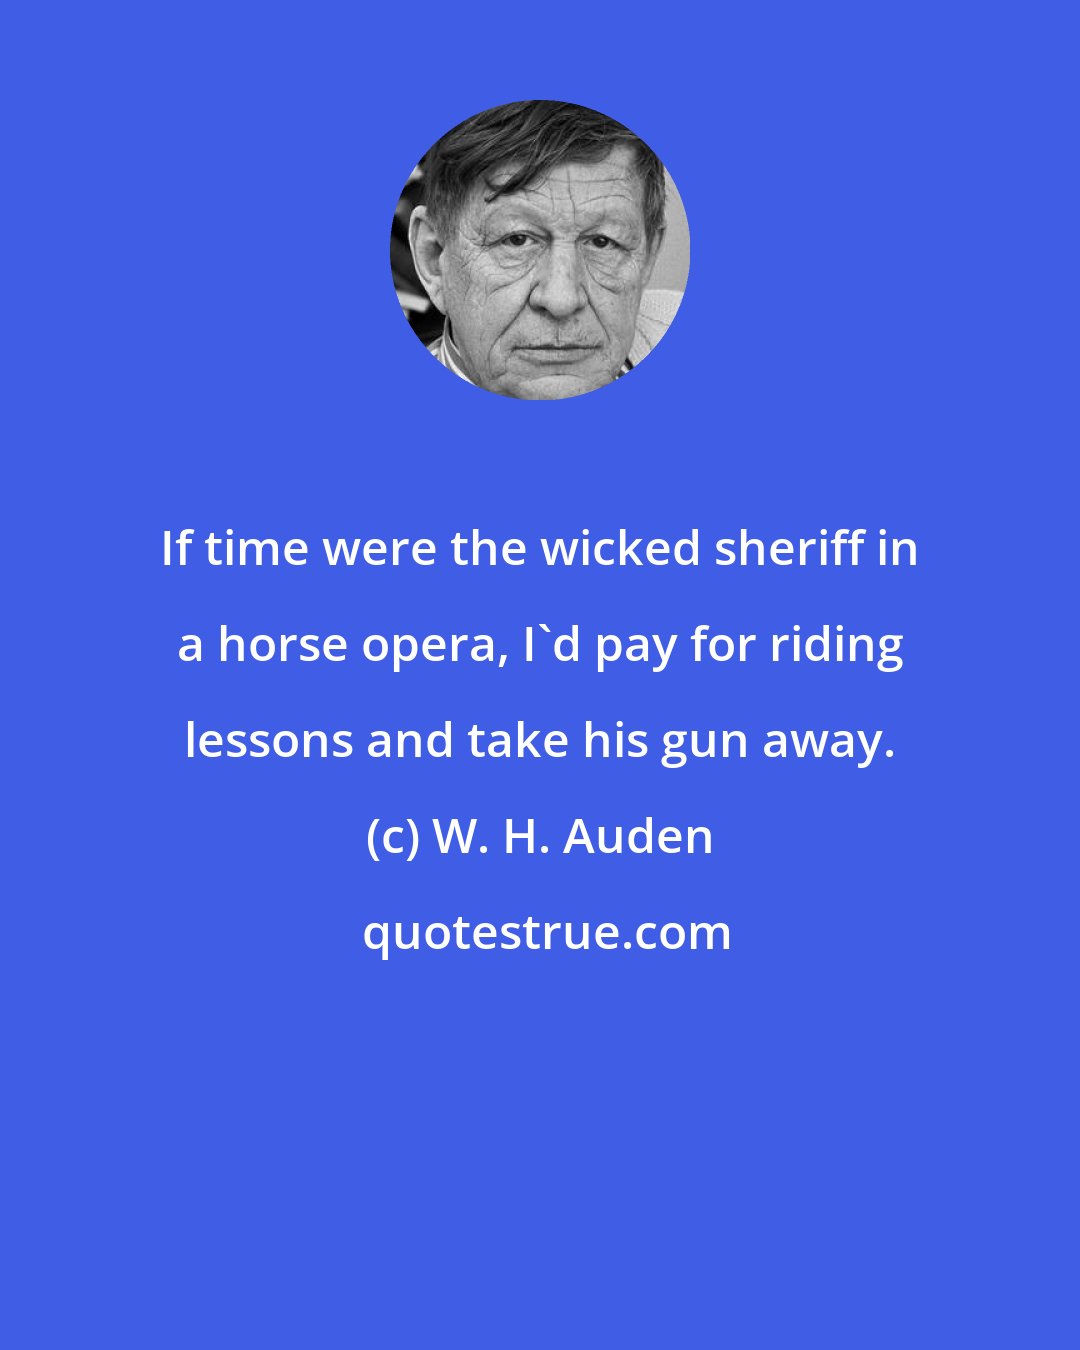 W. H. Auden: If time were the wicked sheriff in a horse opera, I'd pay for riding lessons and take his gun away.